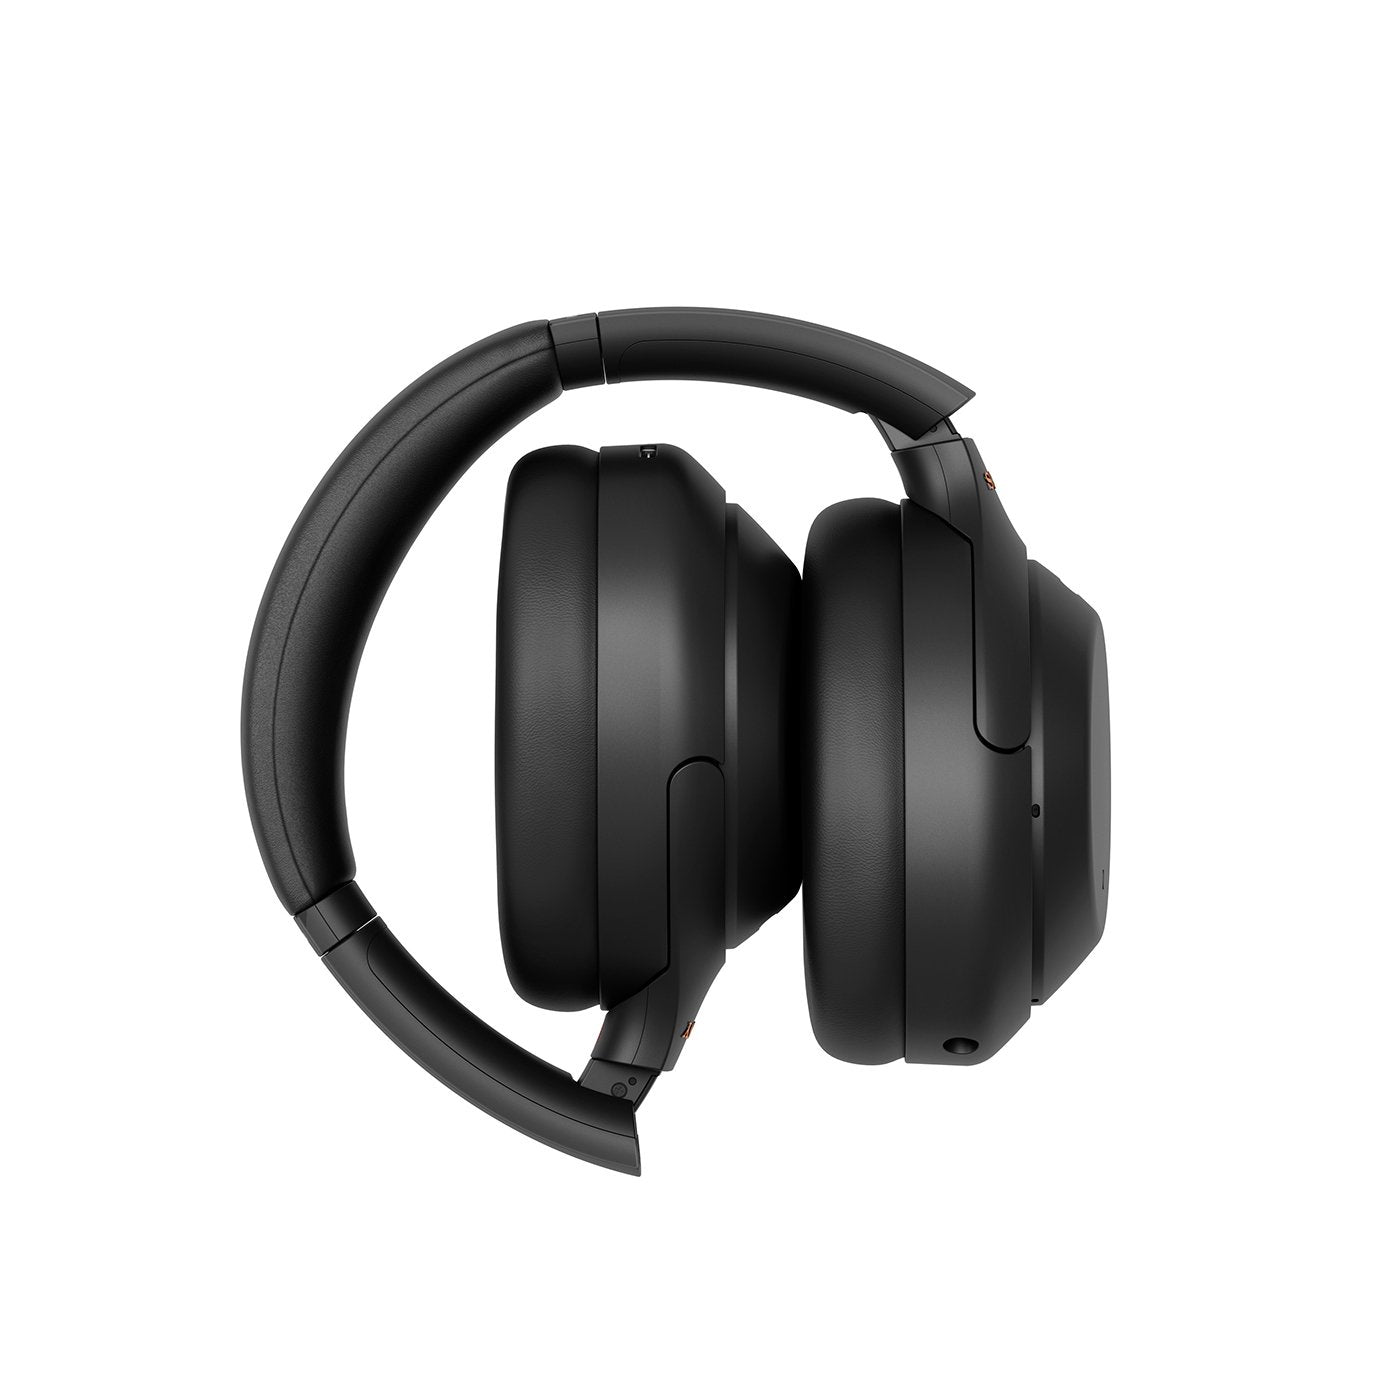 Sony WH-1000XM4 Wireless Noise Cancelling Headphones, 30 Hrs Battery Life, Quick Charge & Alexa